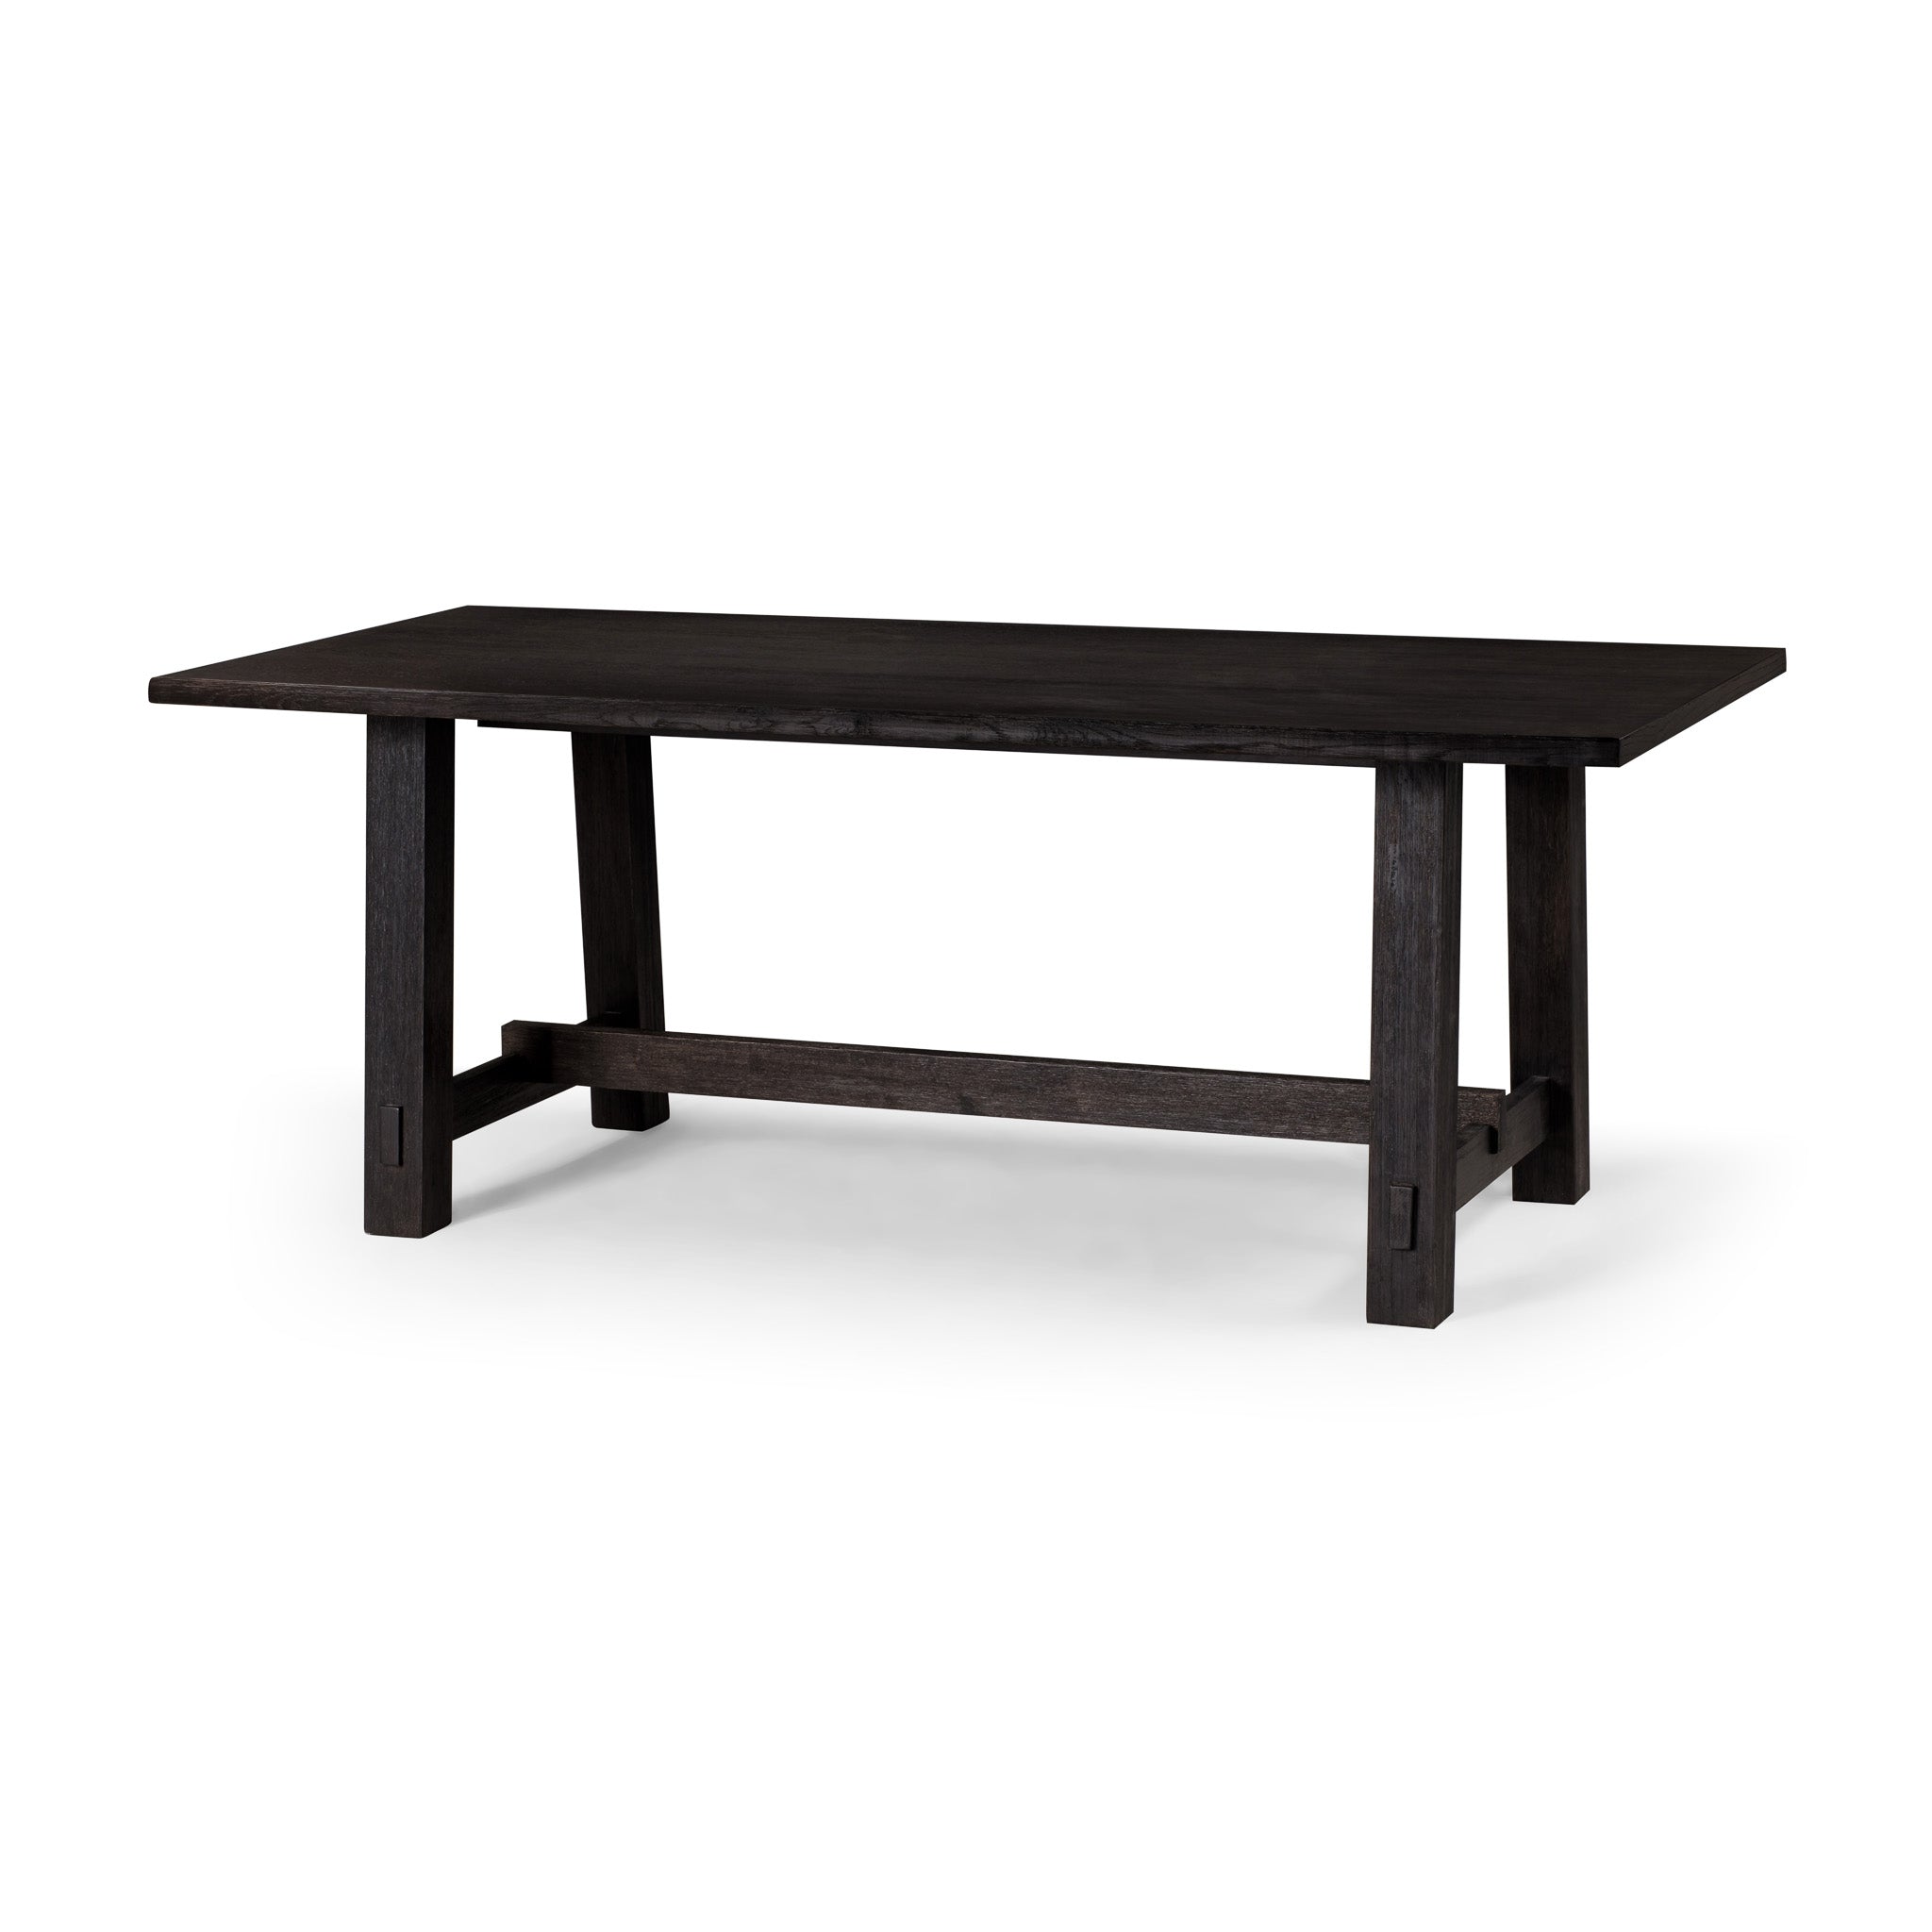 Yves Organic Rectangular Wooden Dining Table in Weathered Black Finish in Dining Furniture by Maven Lane